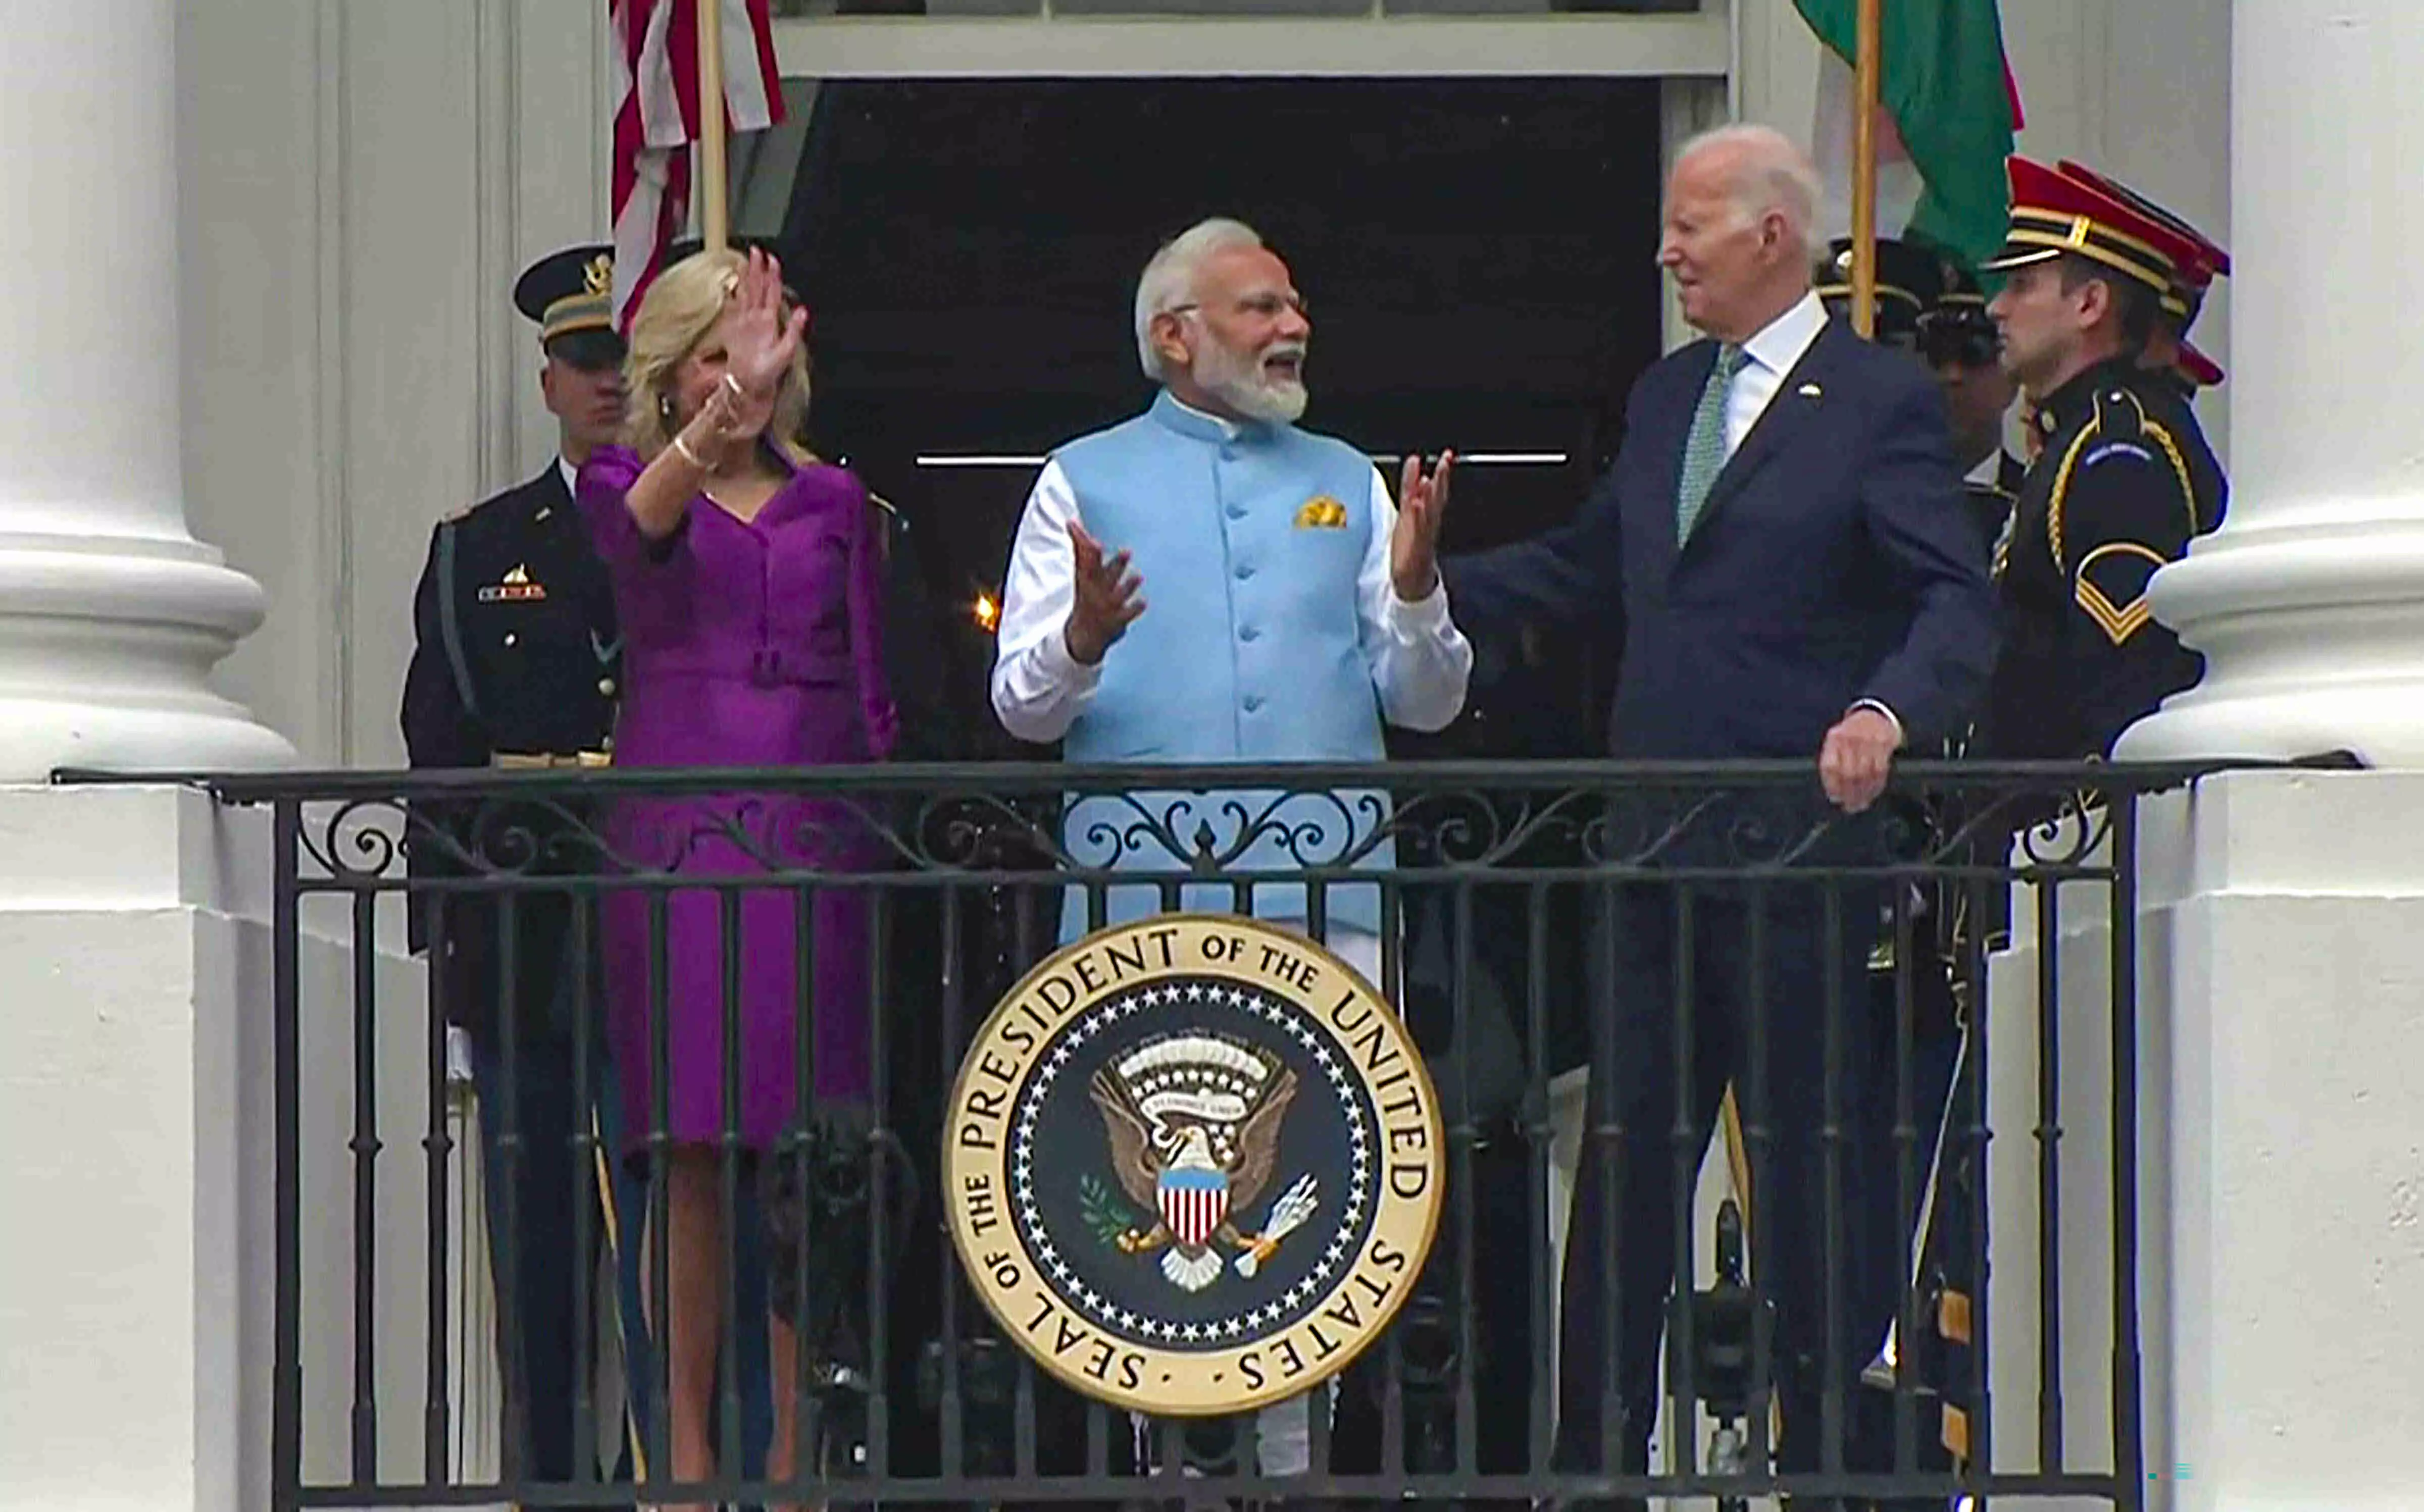 India-United States ties one of the most defining relationships in 21st century: Biden